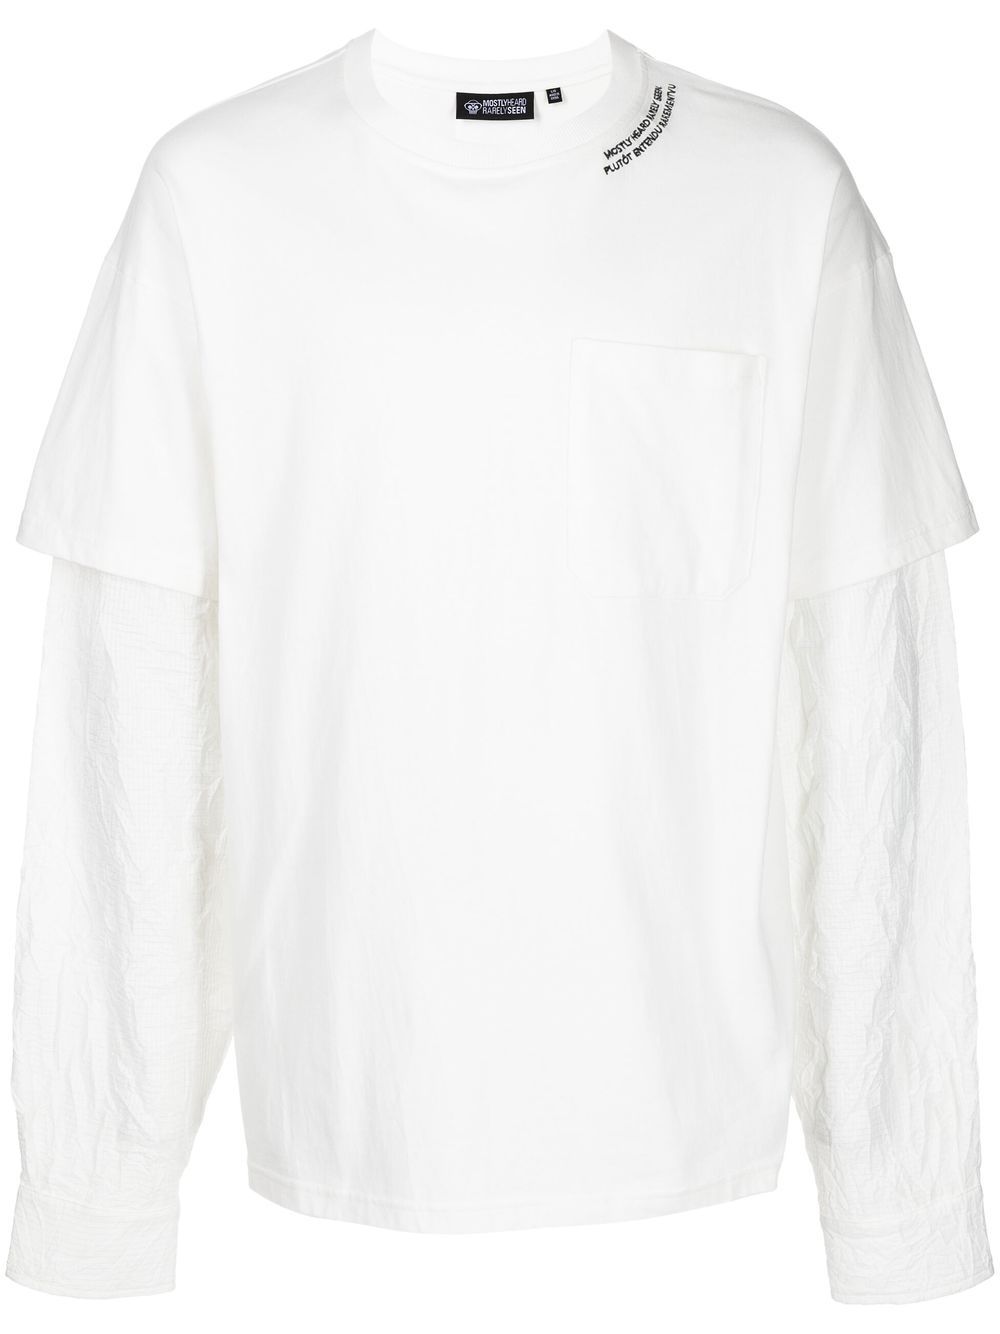 Mostly Heard Rarely Seen Crinkle Woven long-sleeve T-shirt - White von Mostly Heard Rarely Seen